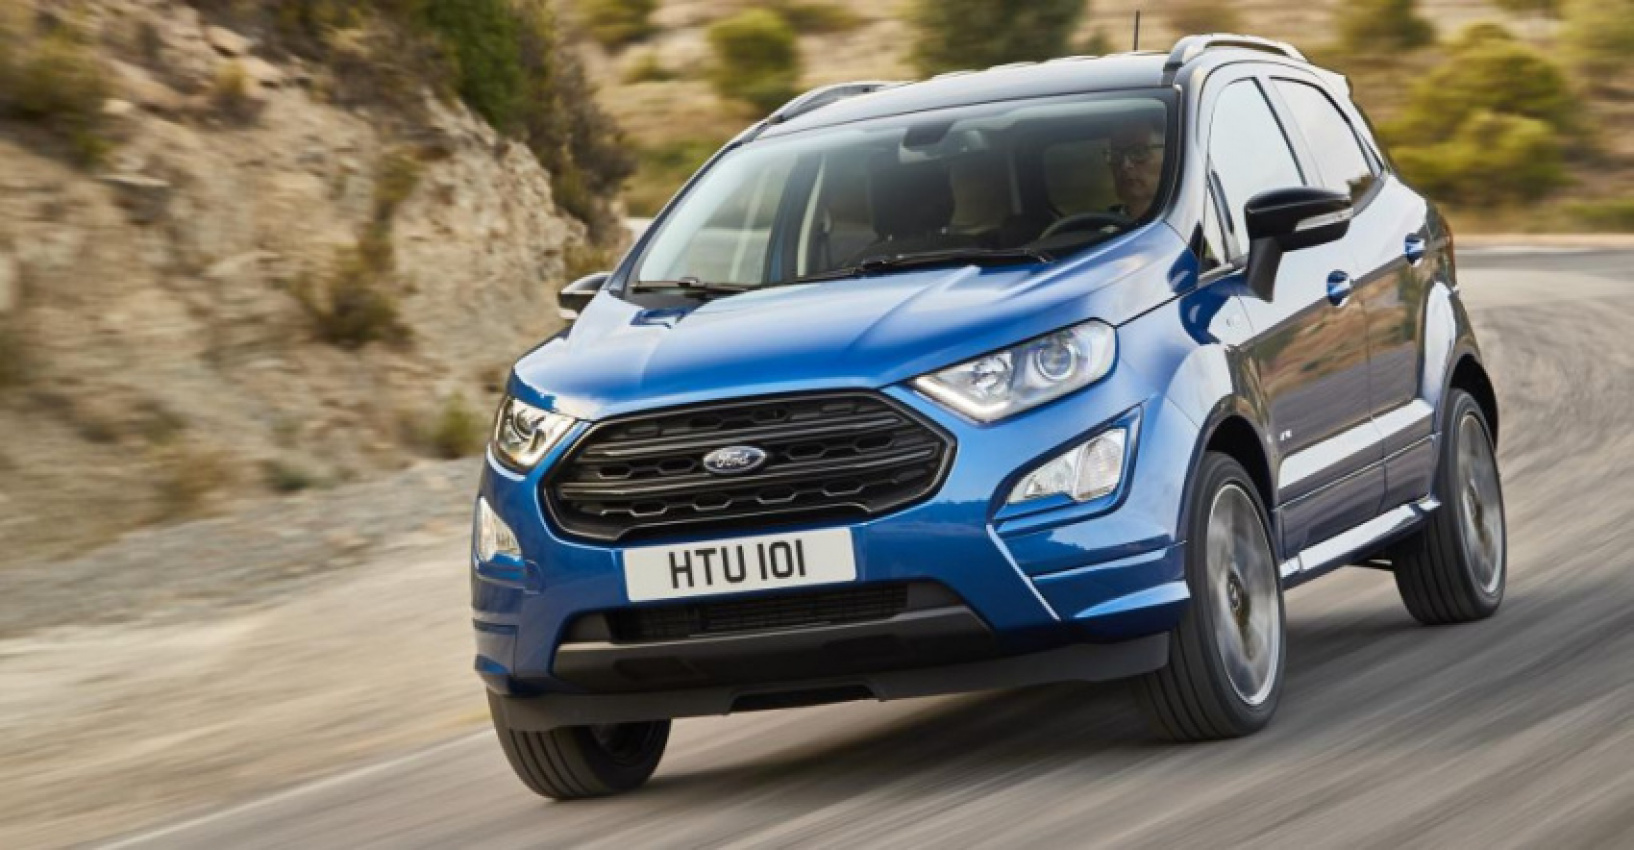 autos, cars, ford, autos ford ecospor, ford ecosport, ford ecosport gets serious with all-wheel drive